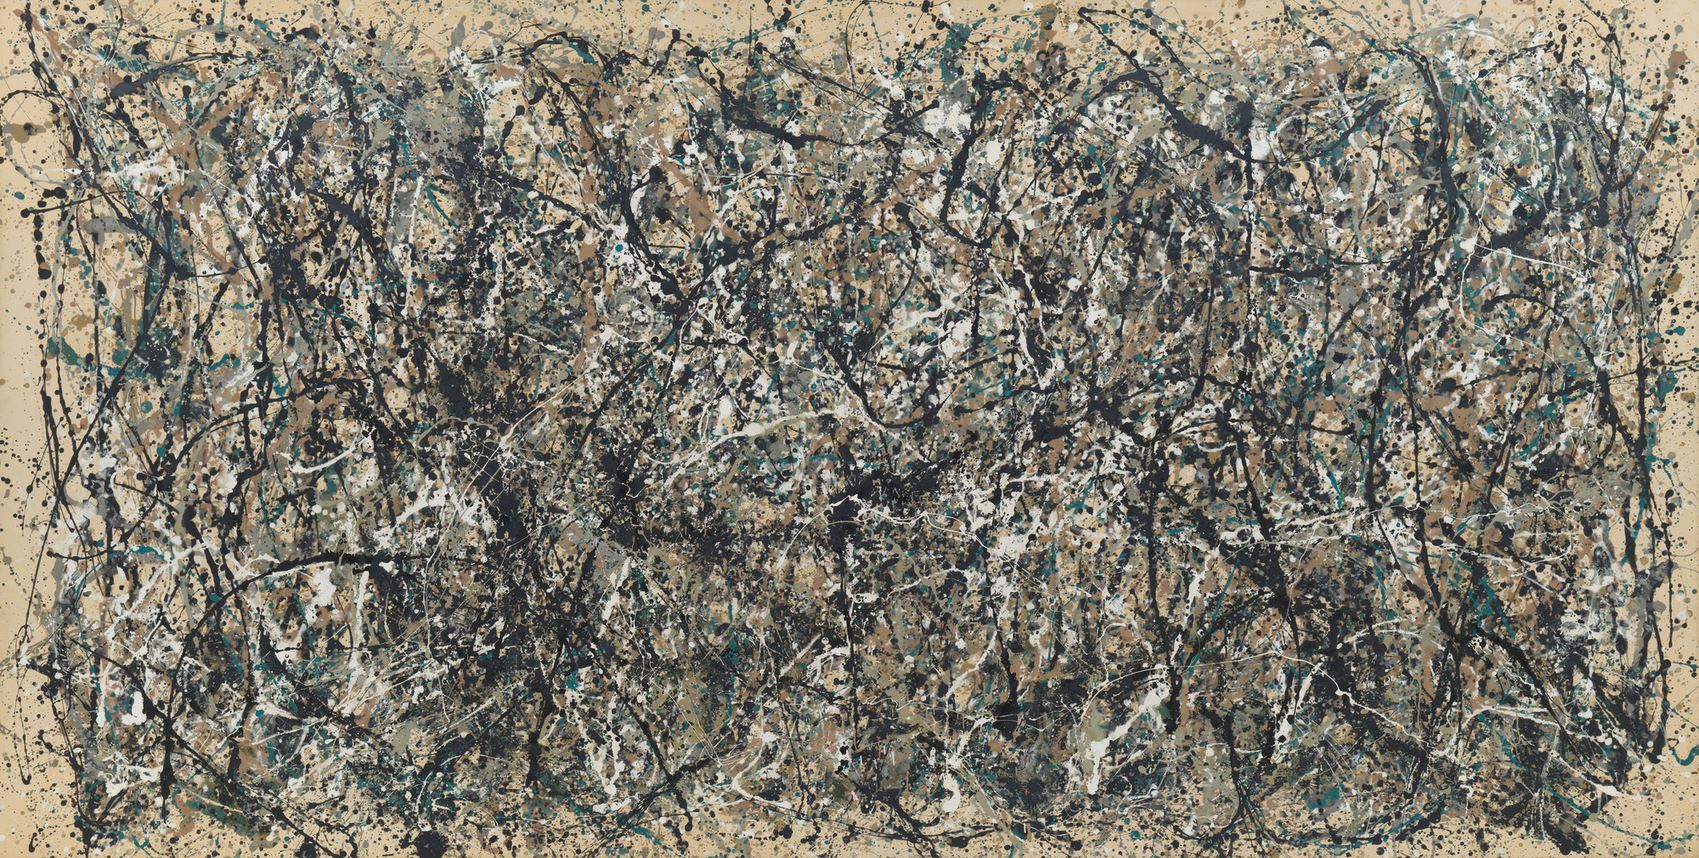 ‘One: Number 31’ by Jackson Pollock, 1950. Oil and enamel paint on canvas, 269.5 × 530.8 cm. © The Pollock‑Krasner Foundation ARS, NY and DACS, London, 2023. Permission to use was granted from DACS.